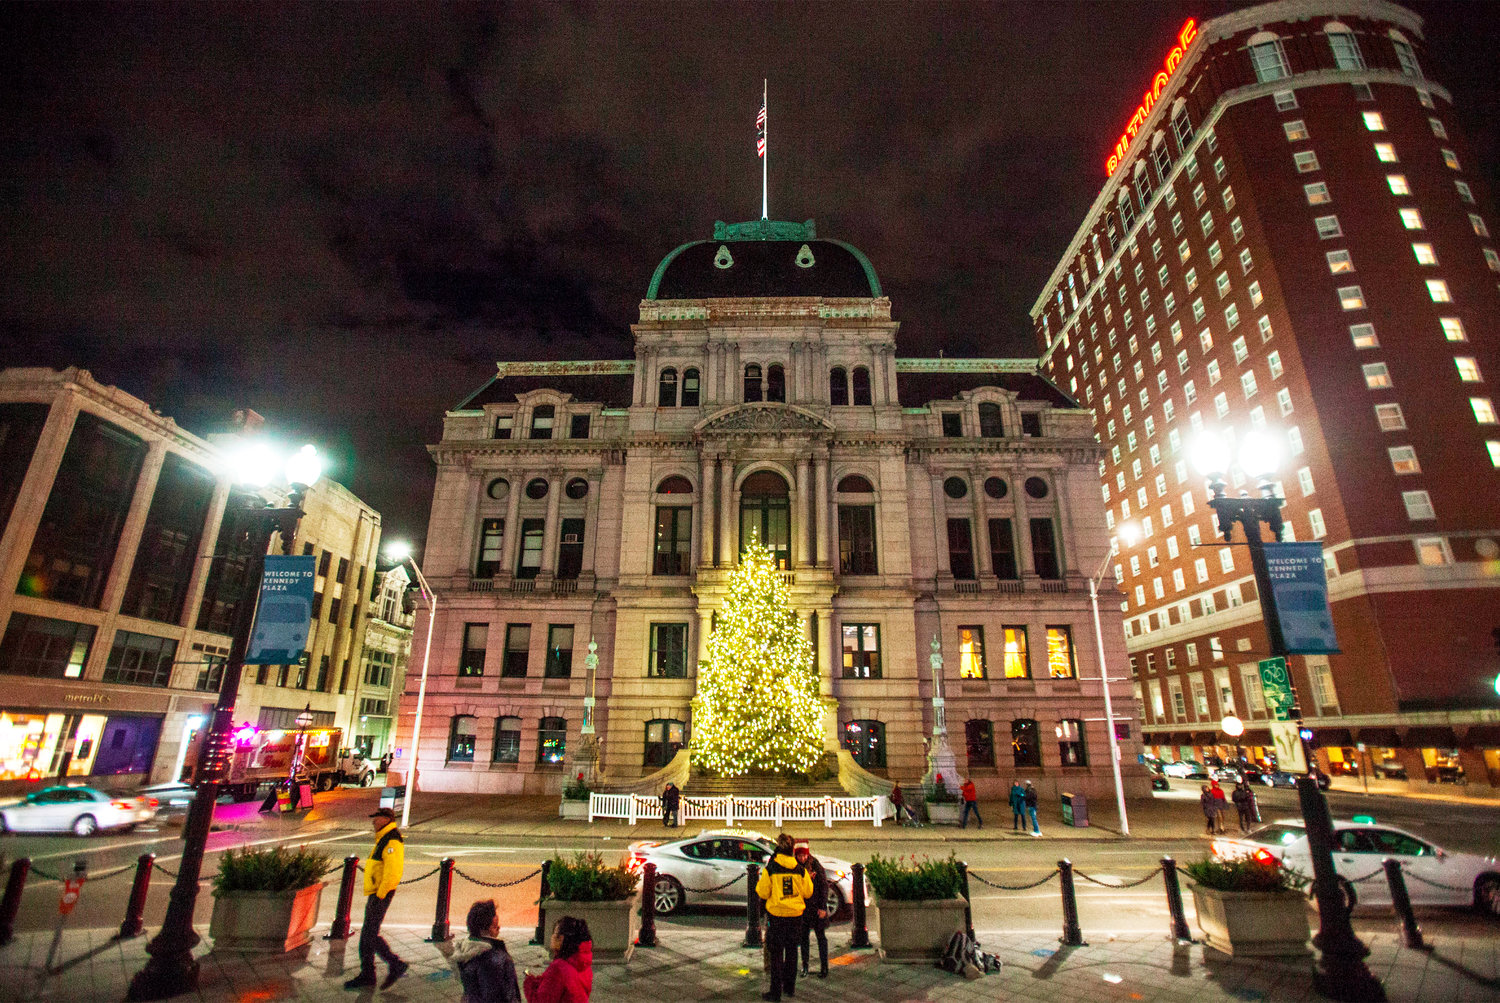 The grand tree at City Hall will be set aglow December 3